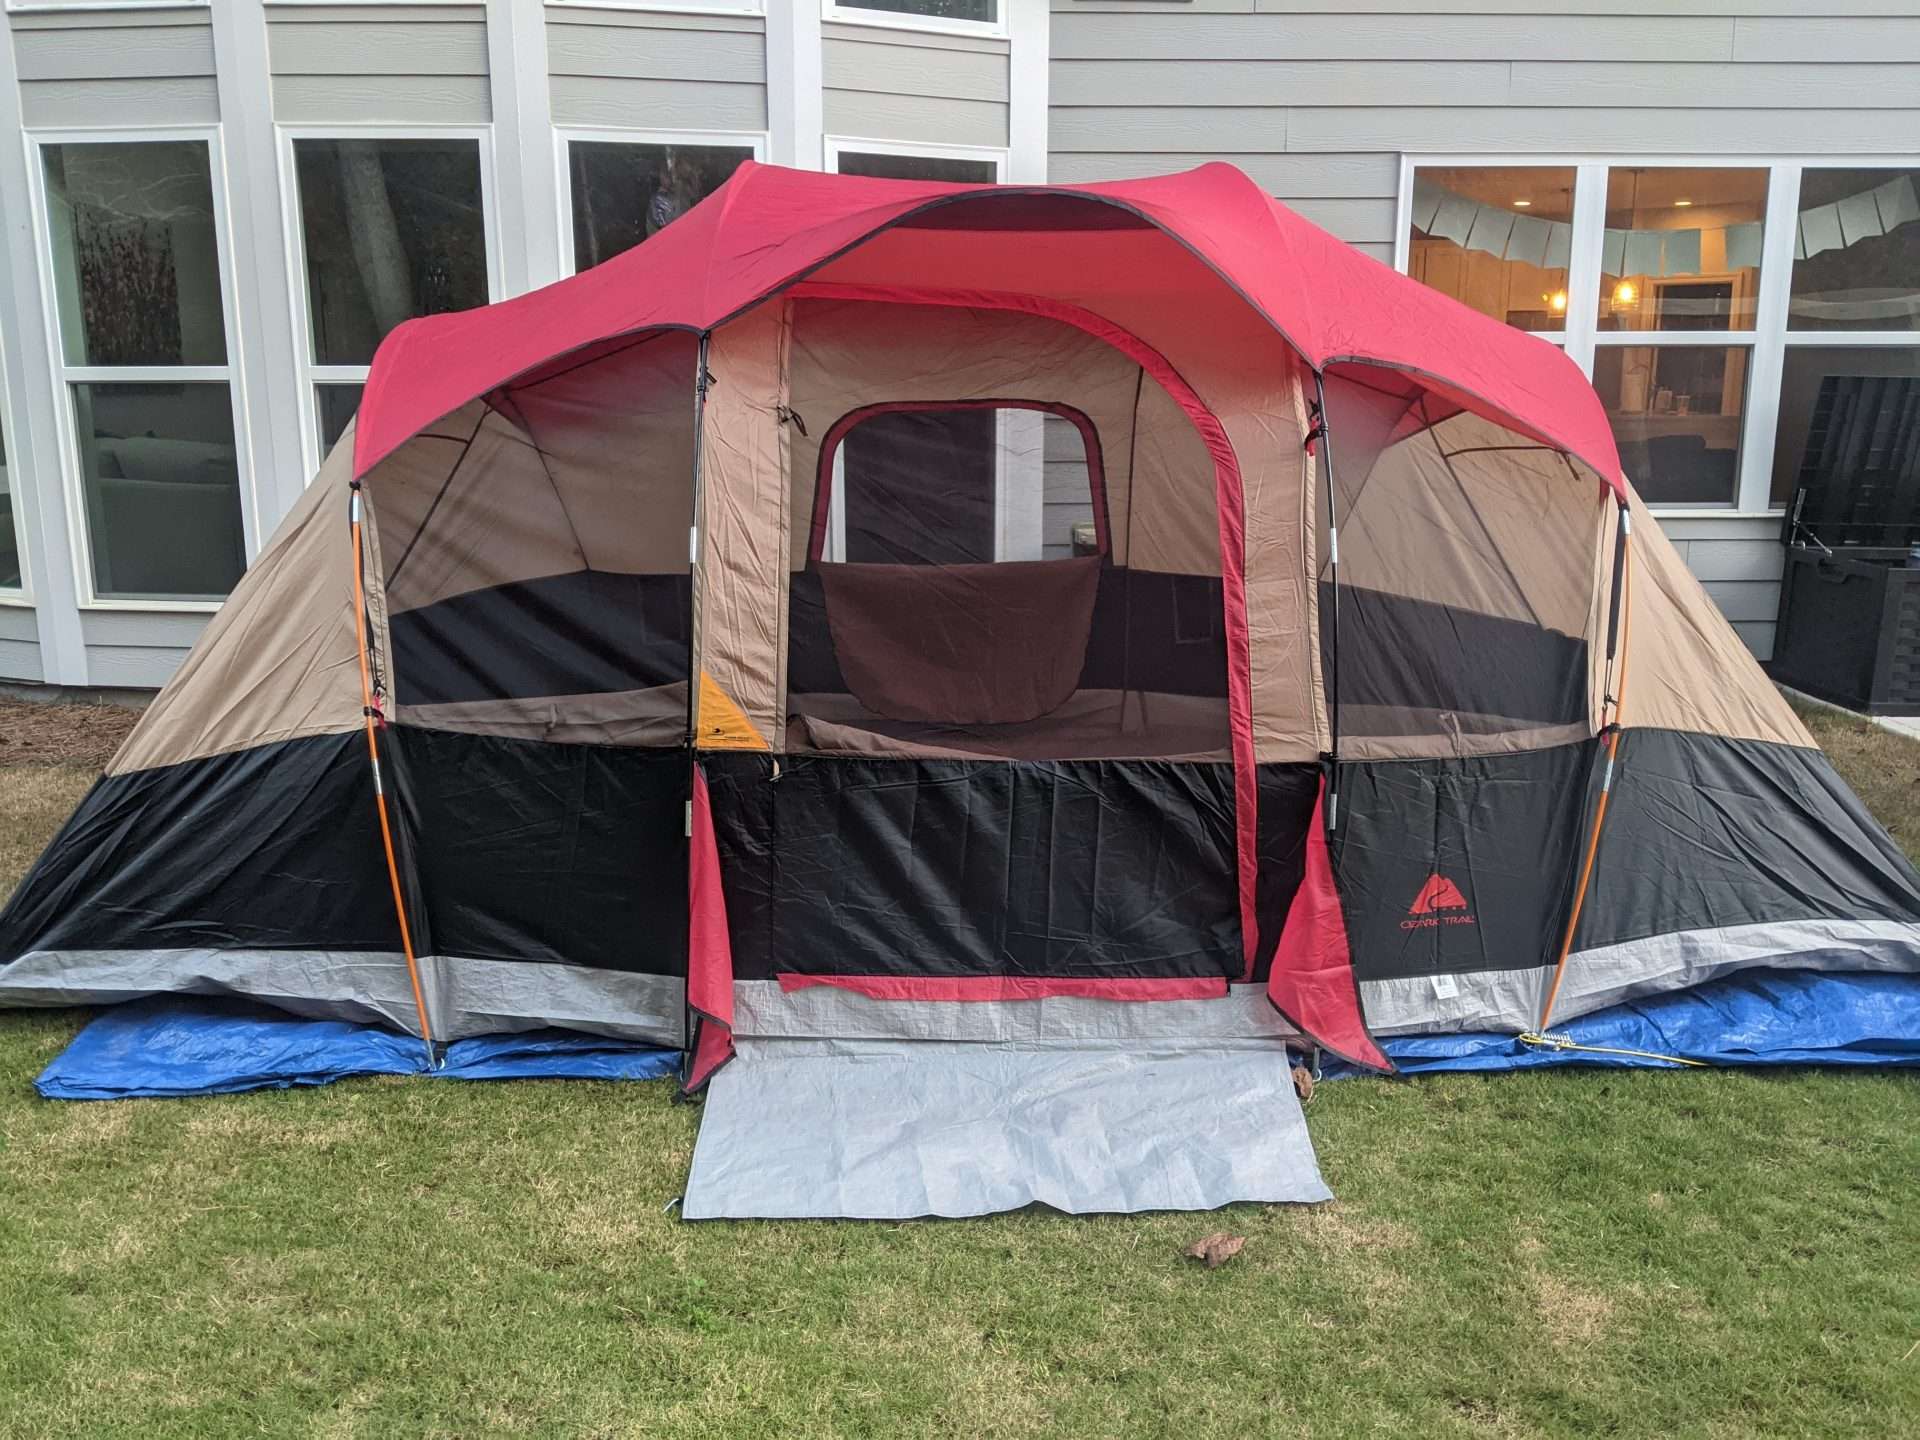 Tent set up in the backyard for camping